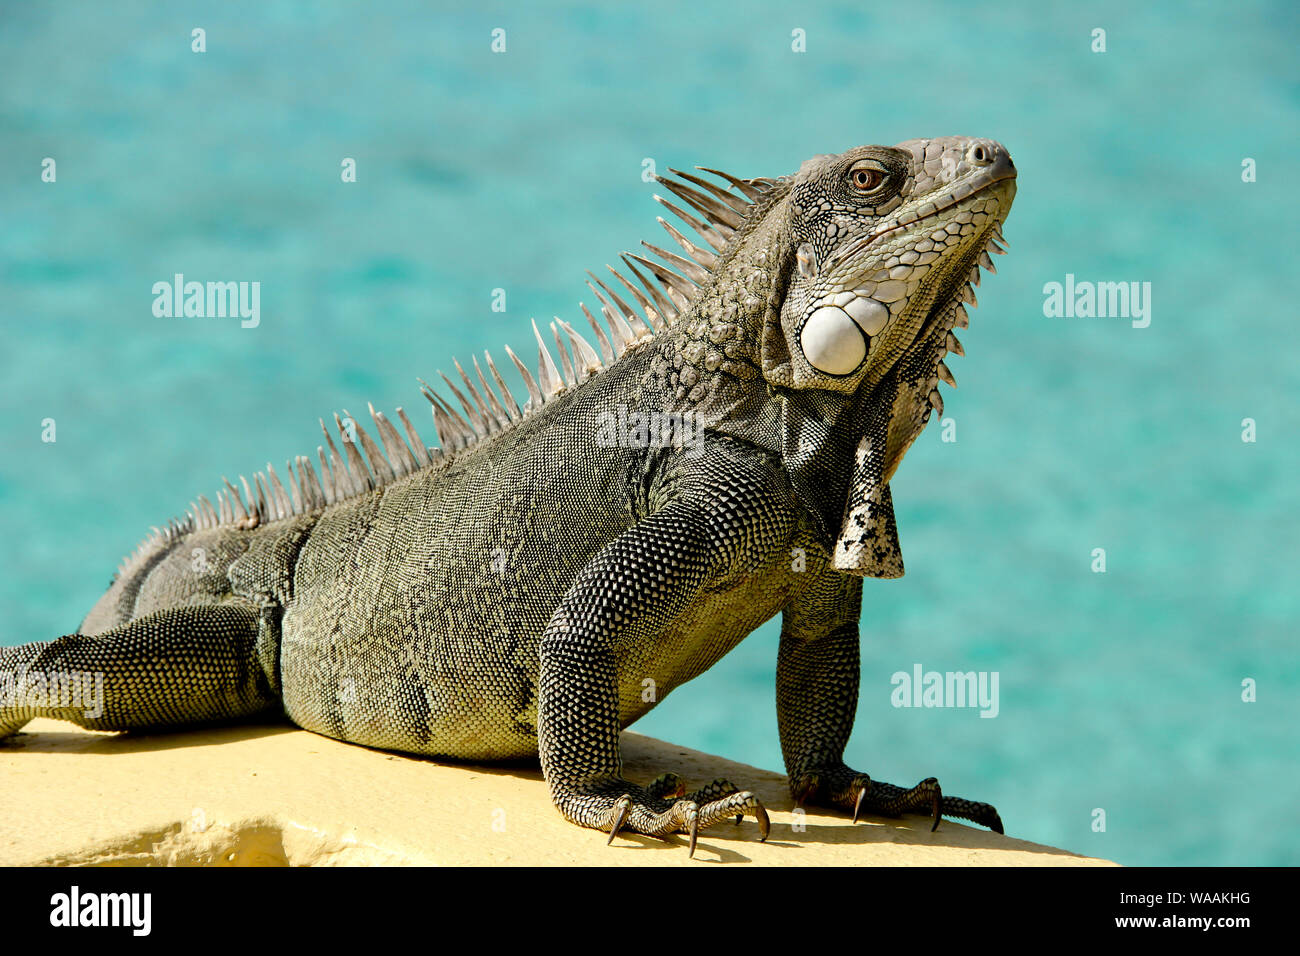 Iguana bathing in the sunshine with the blue ocean in the background Stock Photo